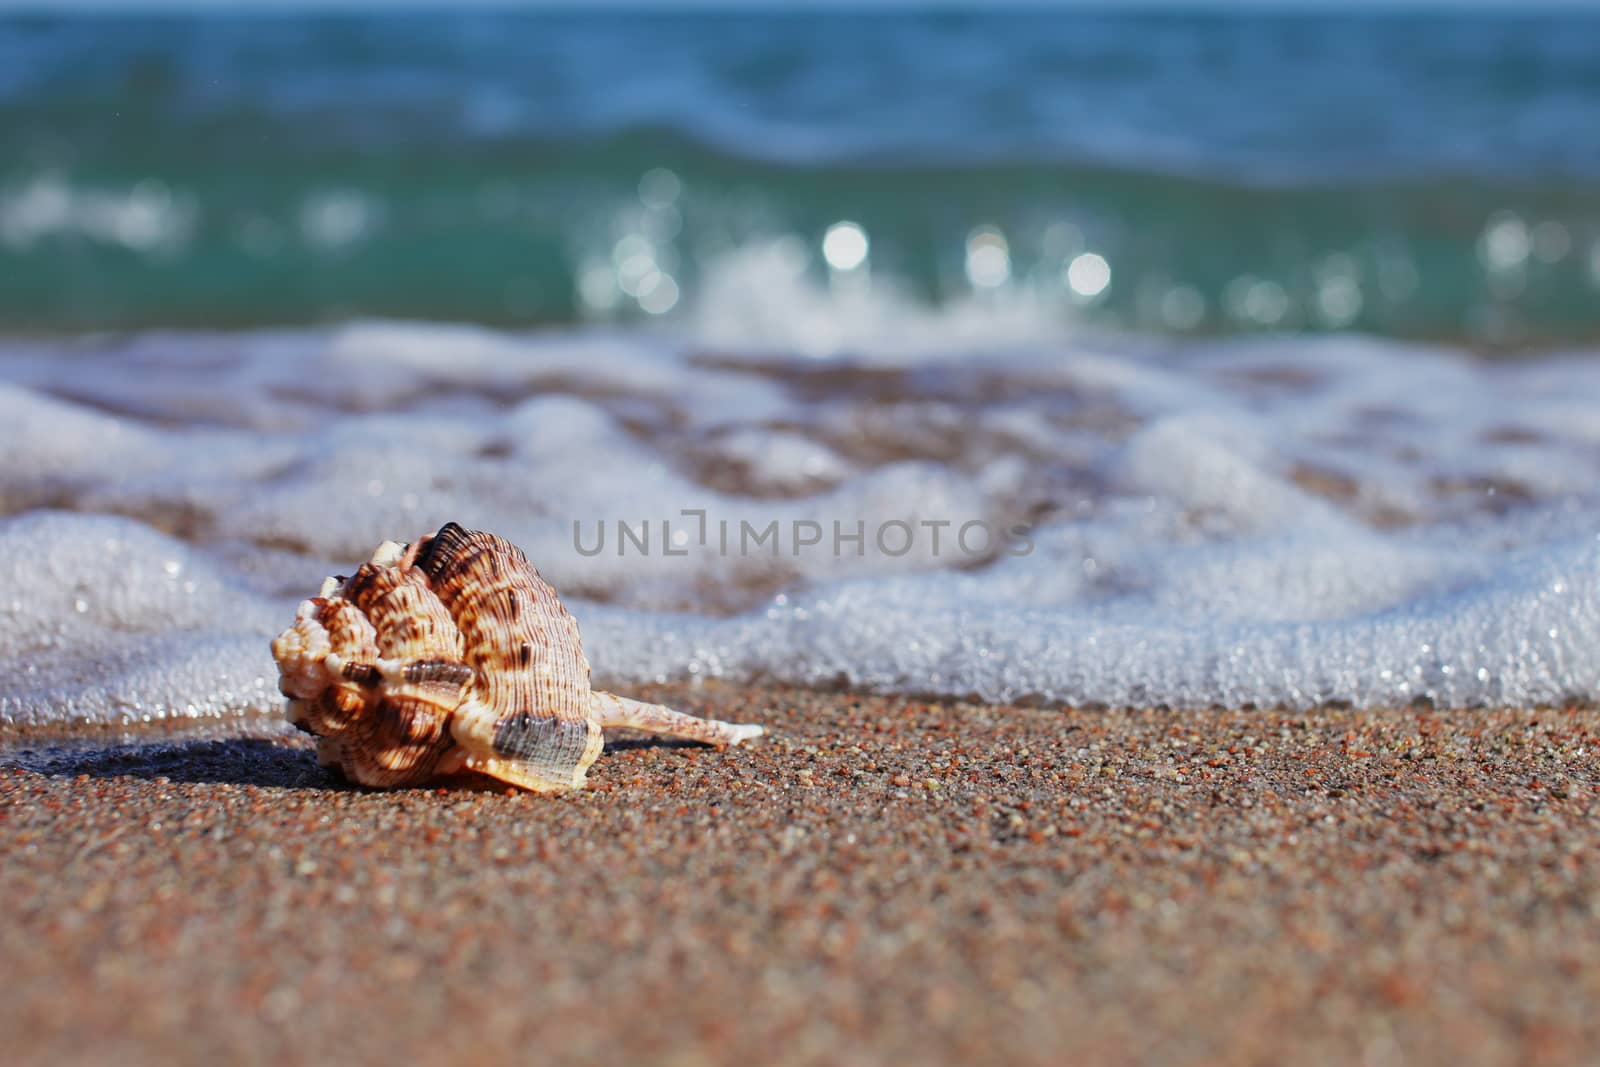 Sea shells on the beach. Sandy beach with waves. Summer vacation concept. Holidays by the sea by selinsmo